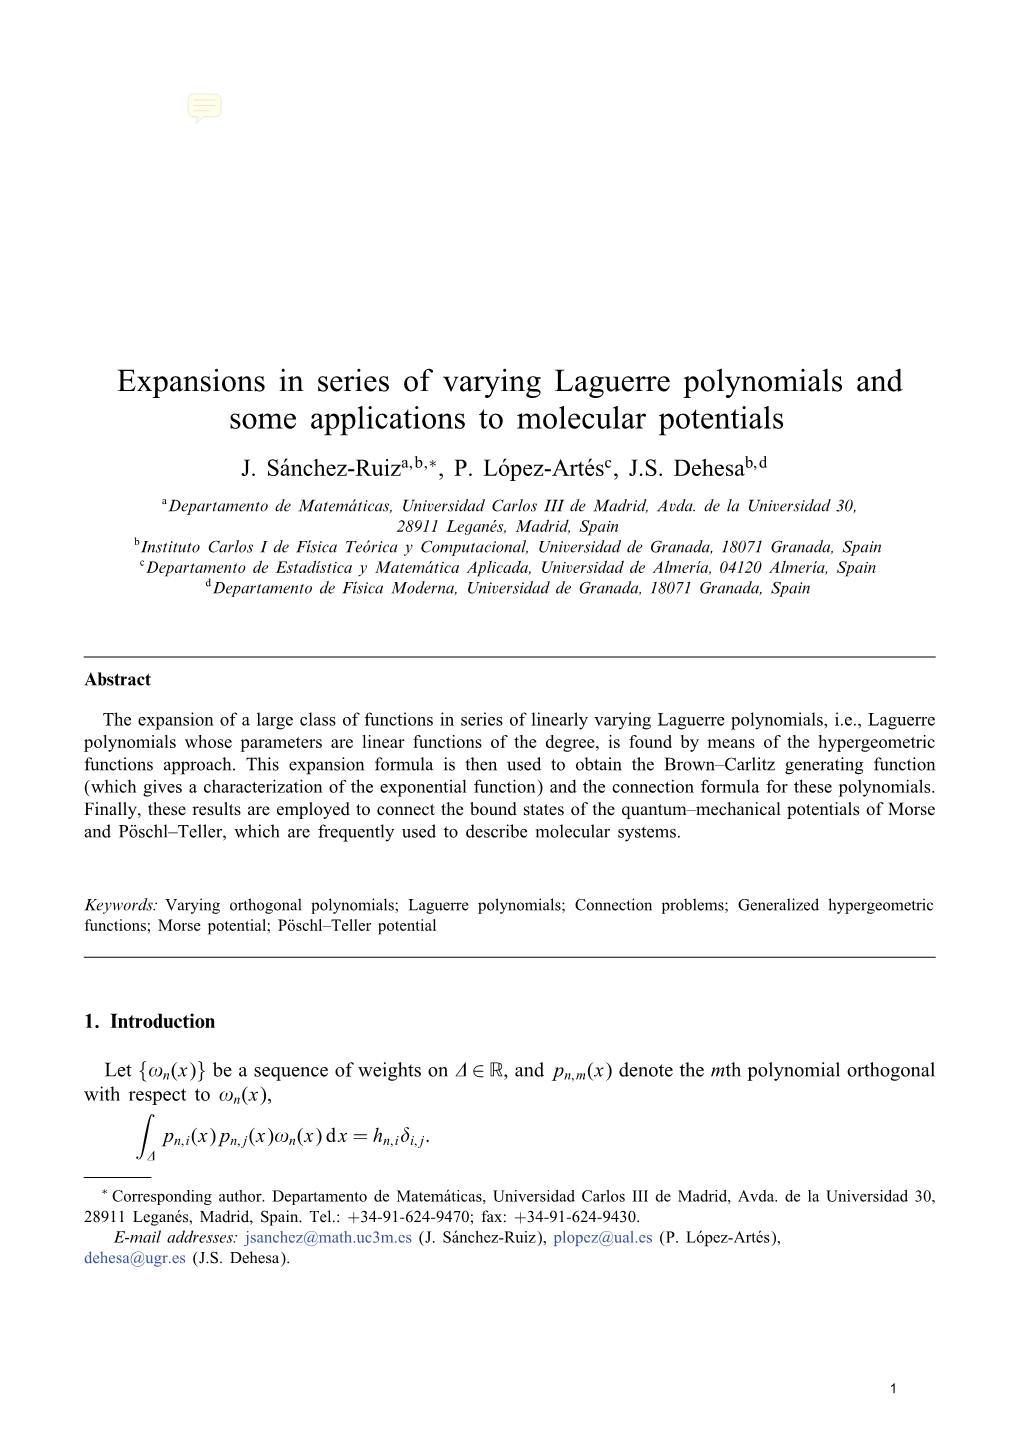 Expansions in Series of Varying Laguerre Polynomials and Some Applications to Molecular Potentials J